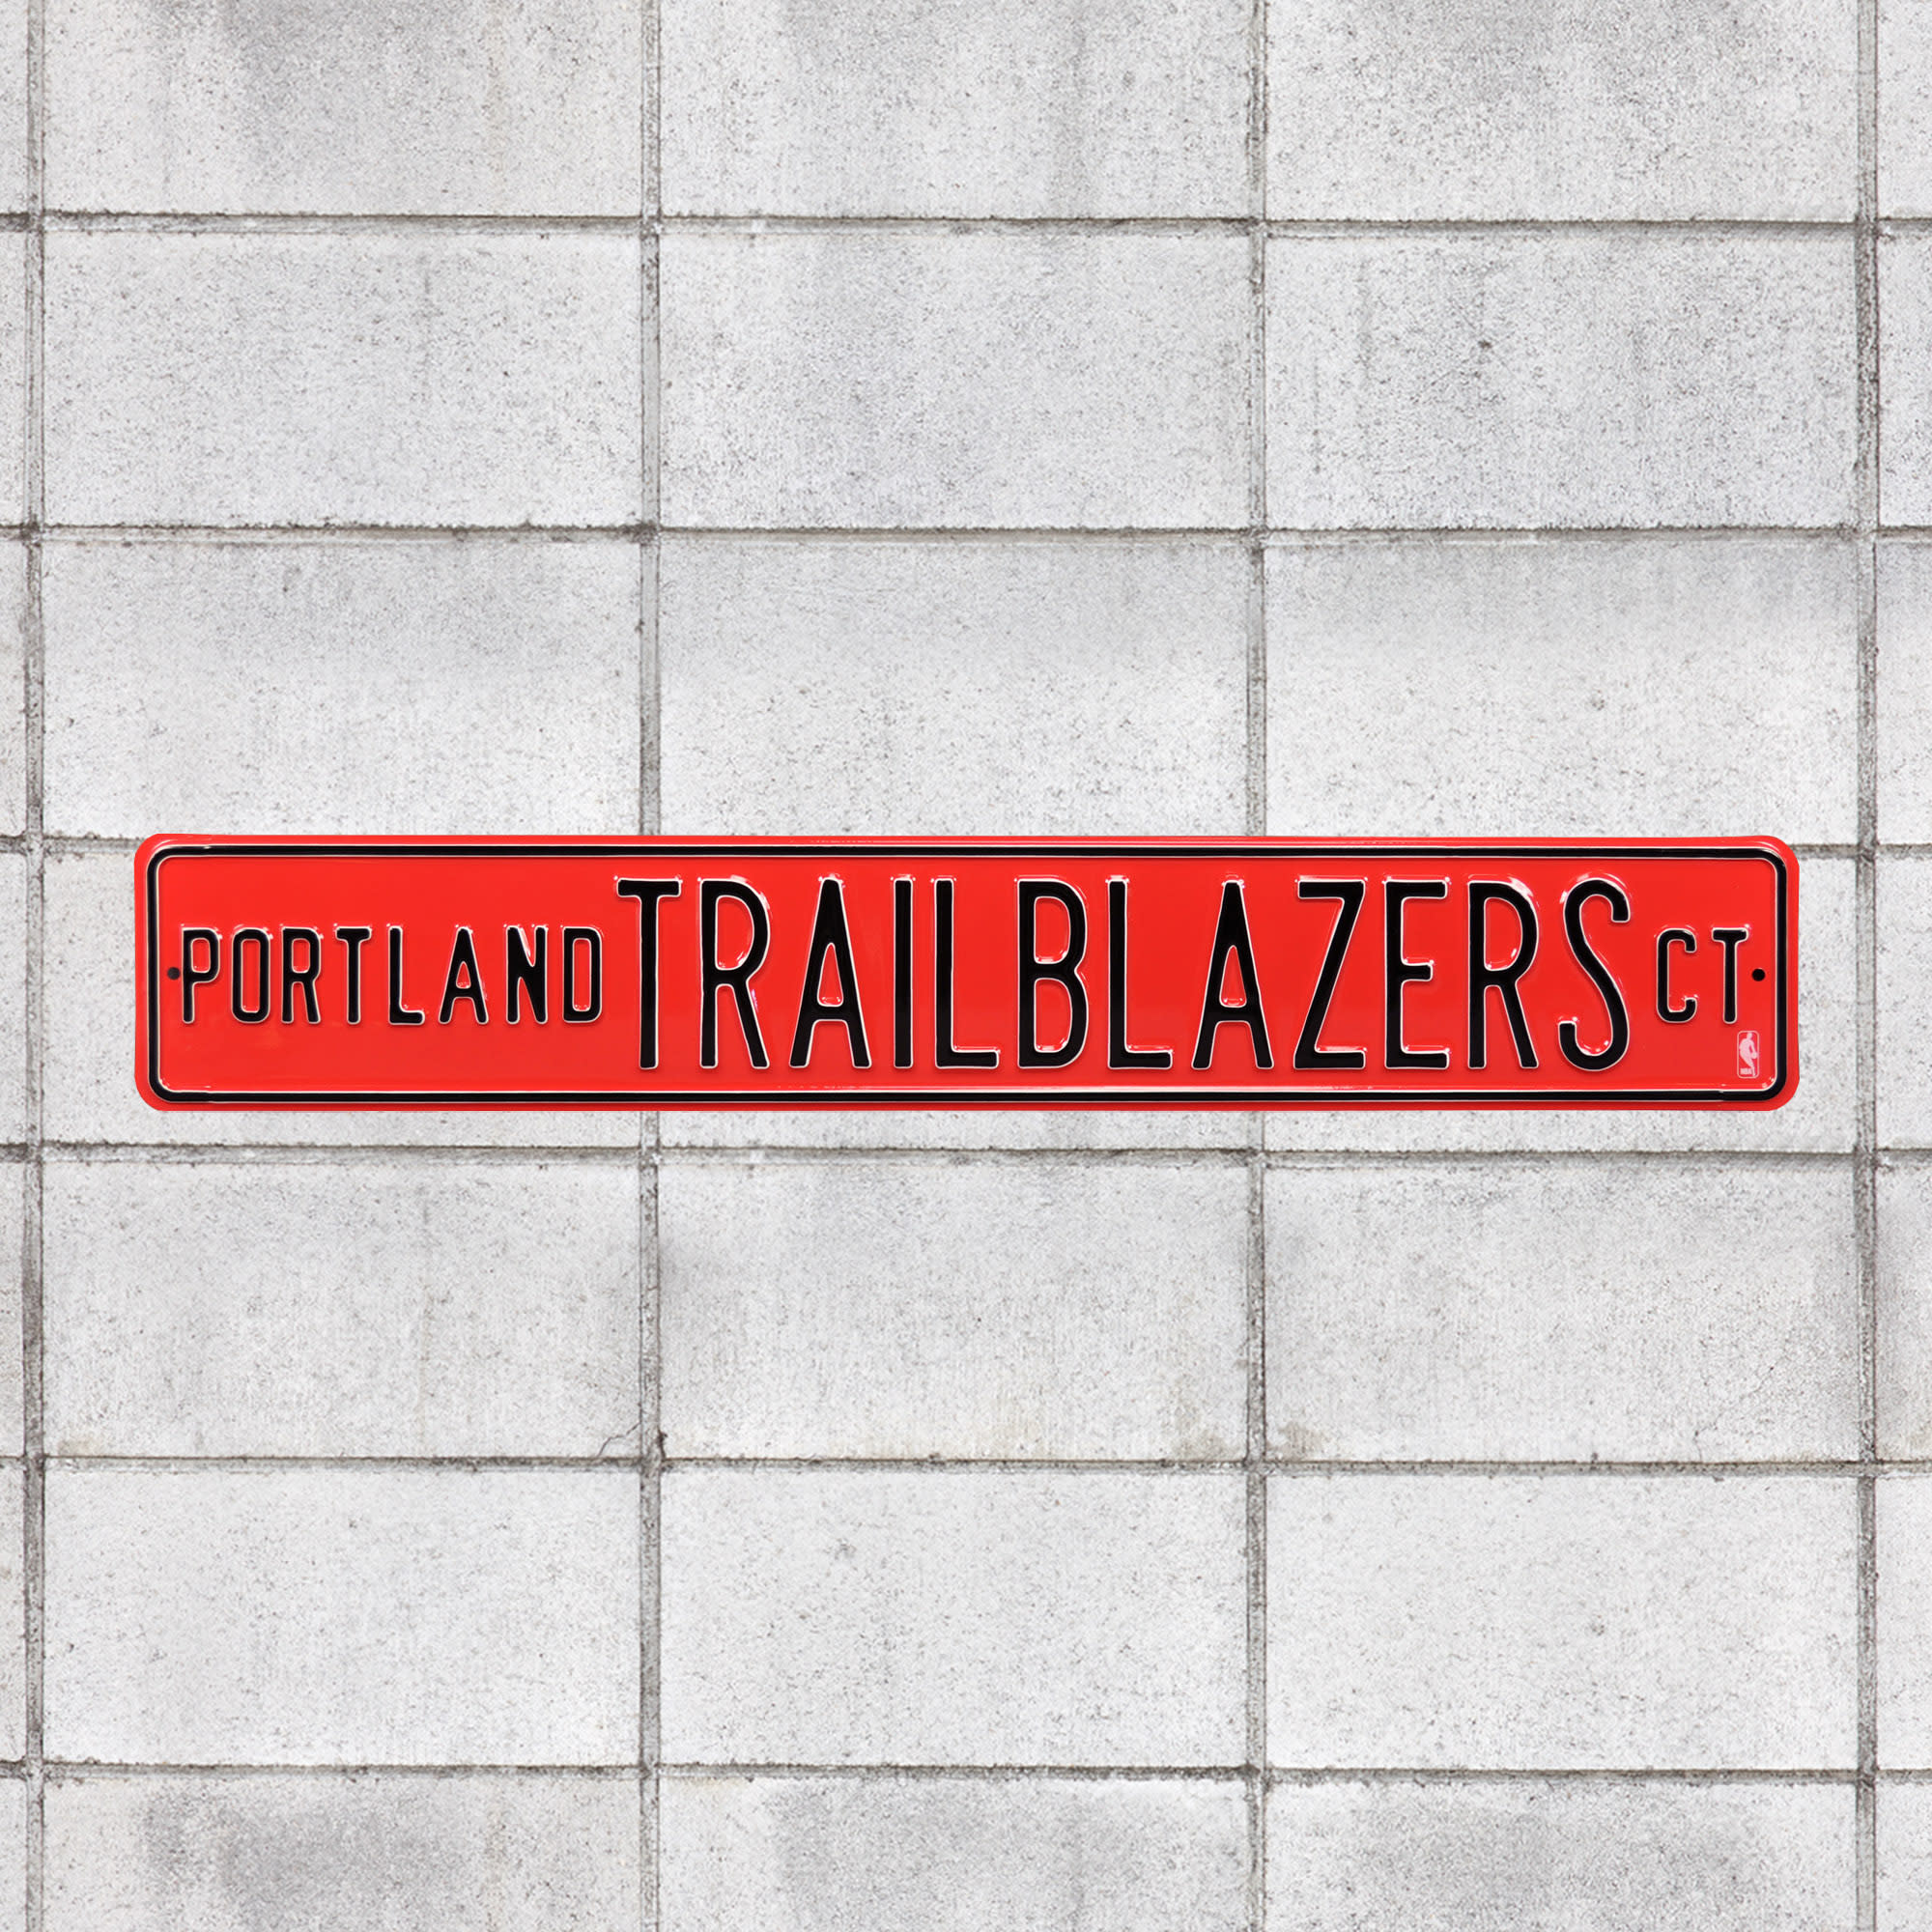 Portland Trail Blazers: Court - Officially Licensed NBA Metal Street Sign 36.0"W x 6.0"H by Fathead | 100% Steel